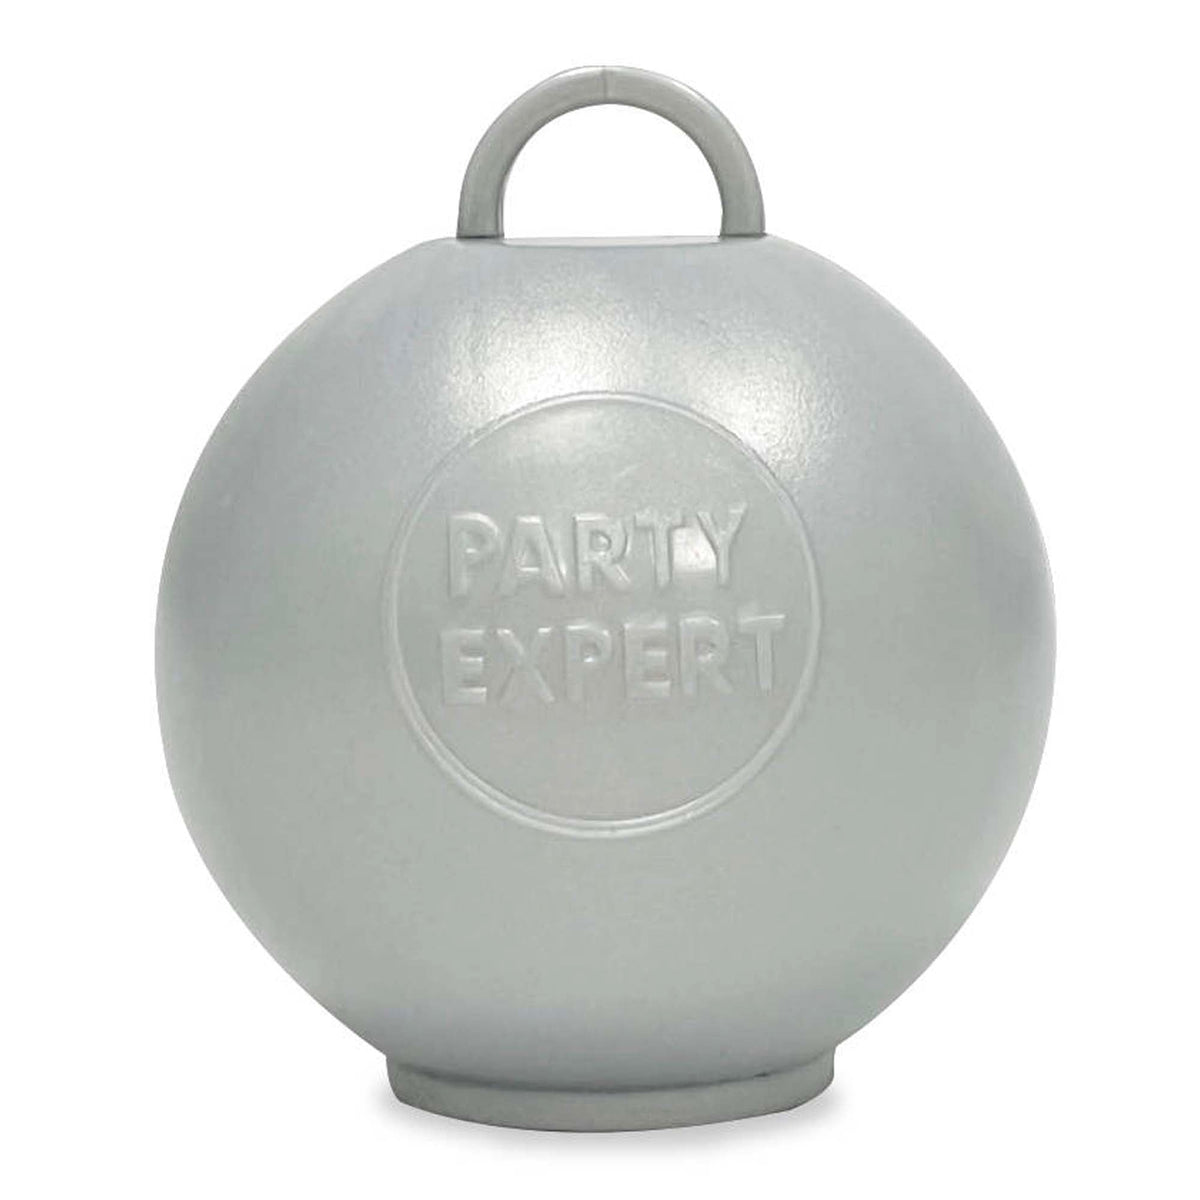 Dongguan Caipai Plastic Hardware Balloons Silver Bubble Balloon Weight, 1 Count 810077659465